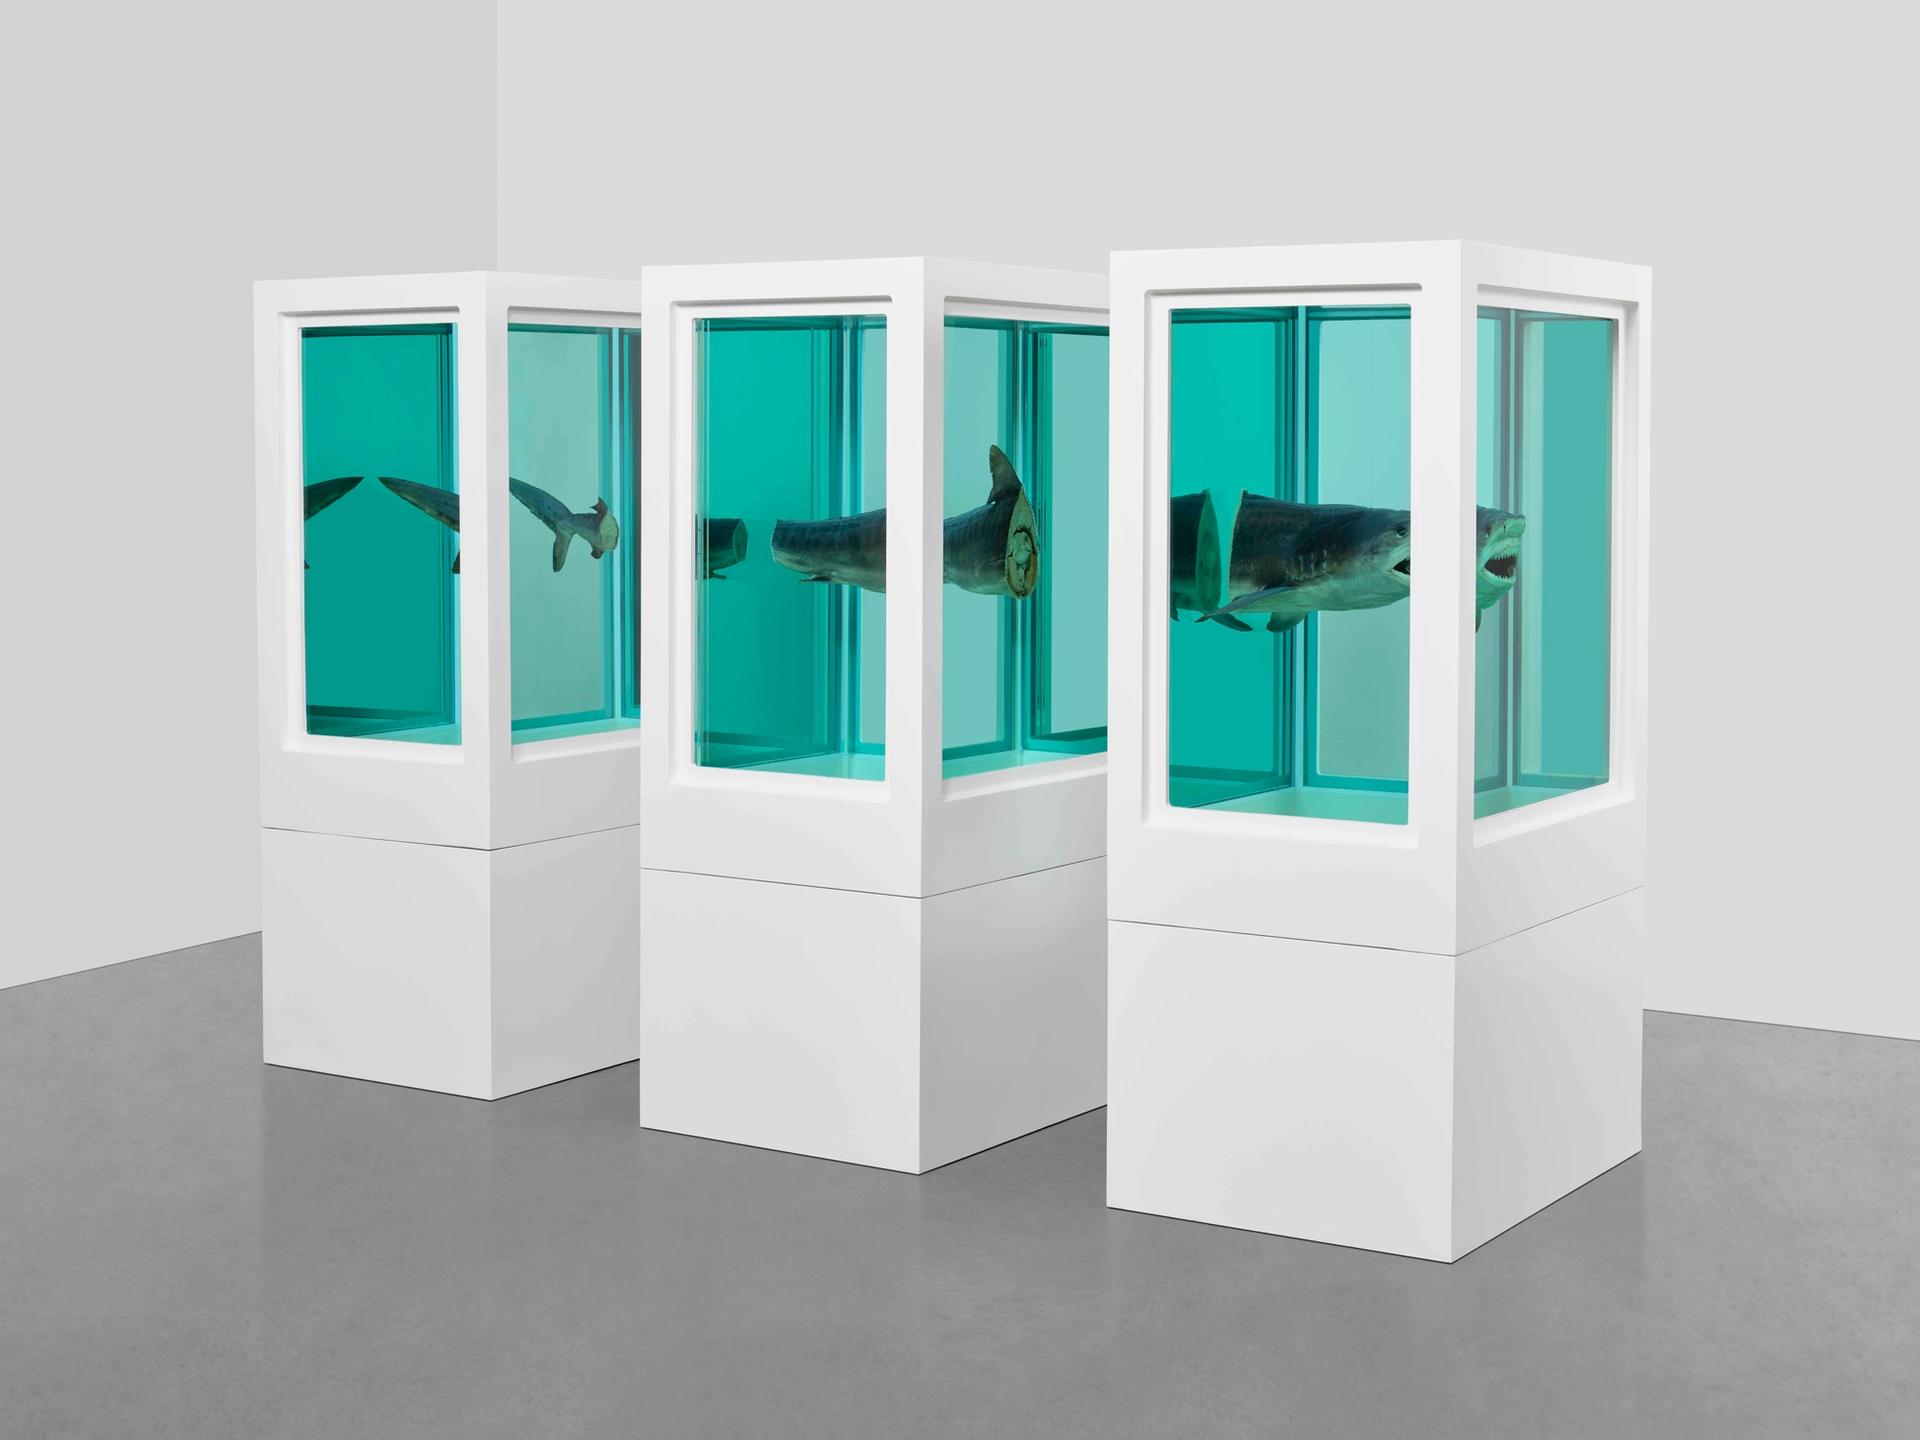 Damien Hirst's Myth Explored, Explained, Exploded (1993) will be included in the show Courtesy of the artist